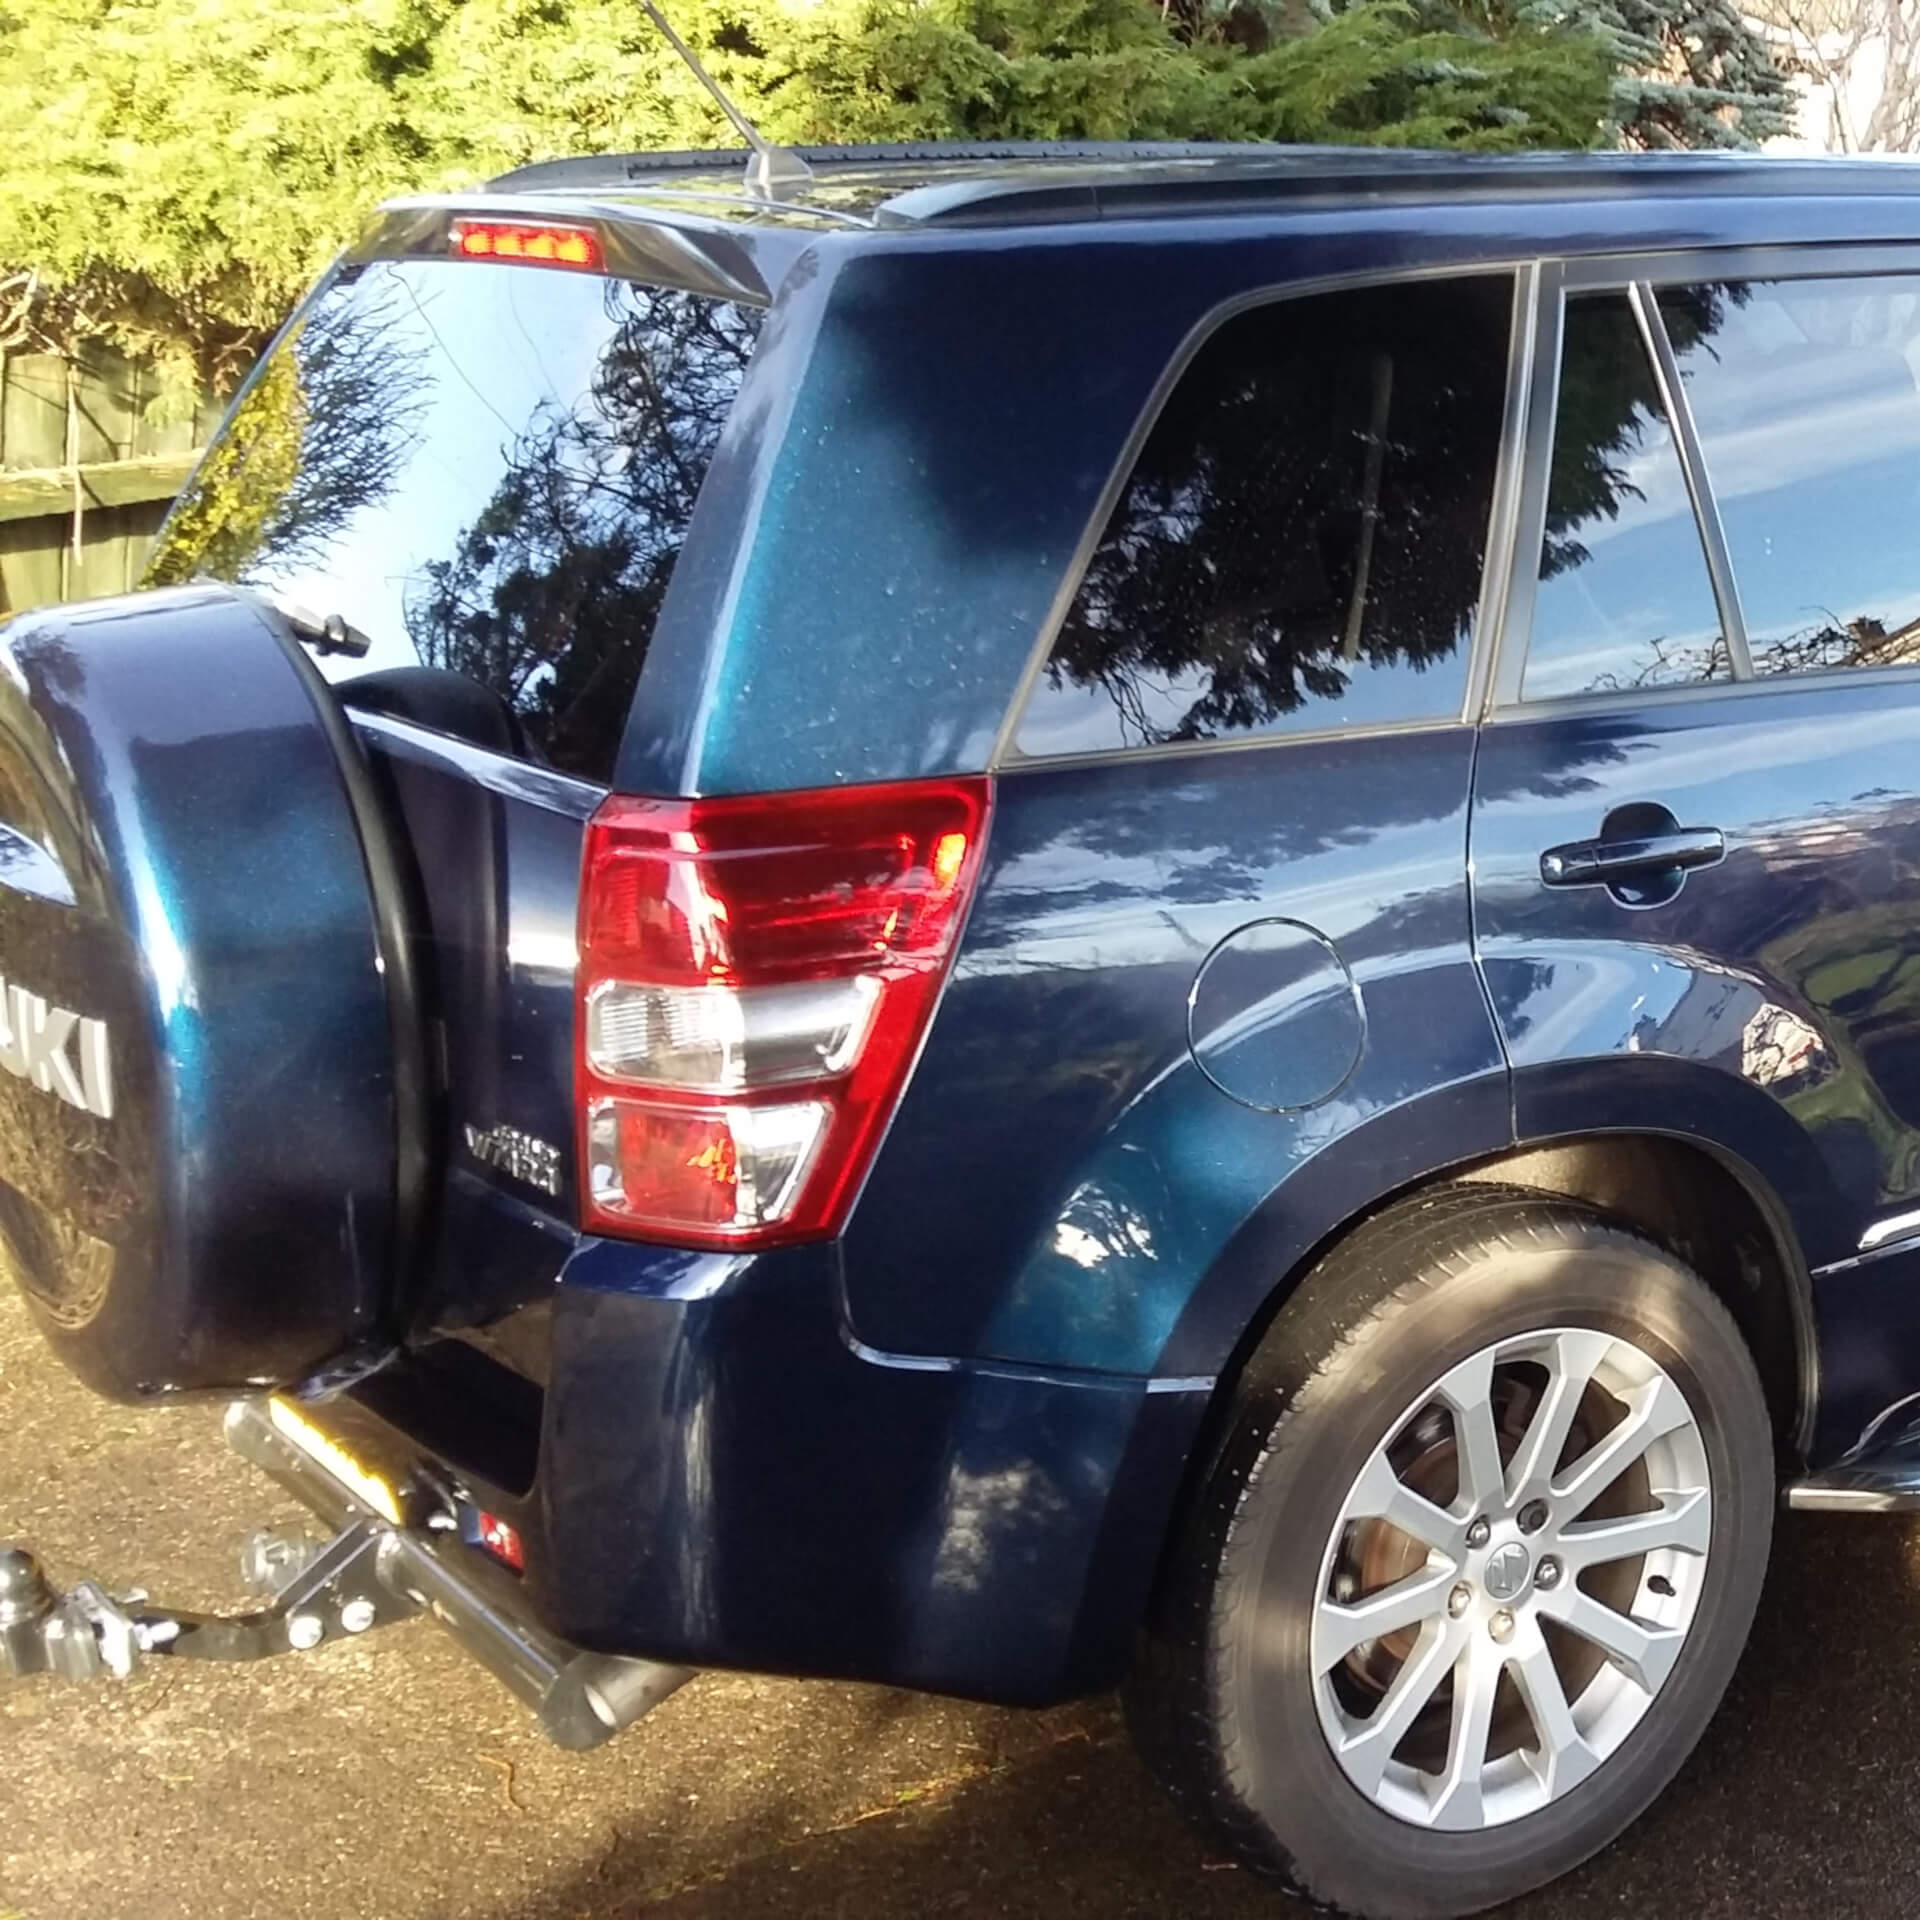 Direct4x4 accessories for Suzuki Grand Vitara vehicles with a photo of the back of a blue Suzuki Grand Vitara with the spare tyre on the back parked in front of trees